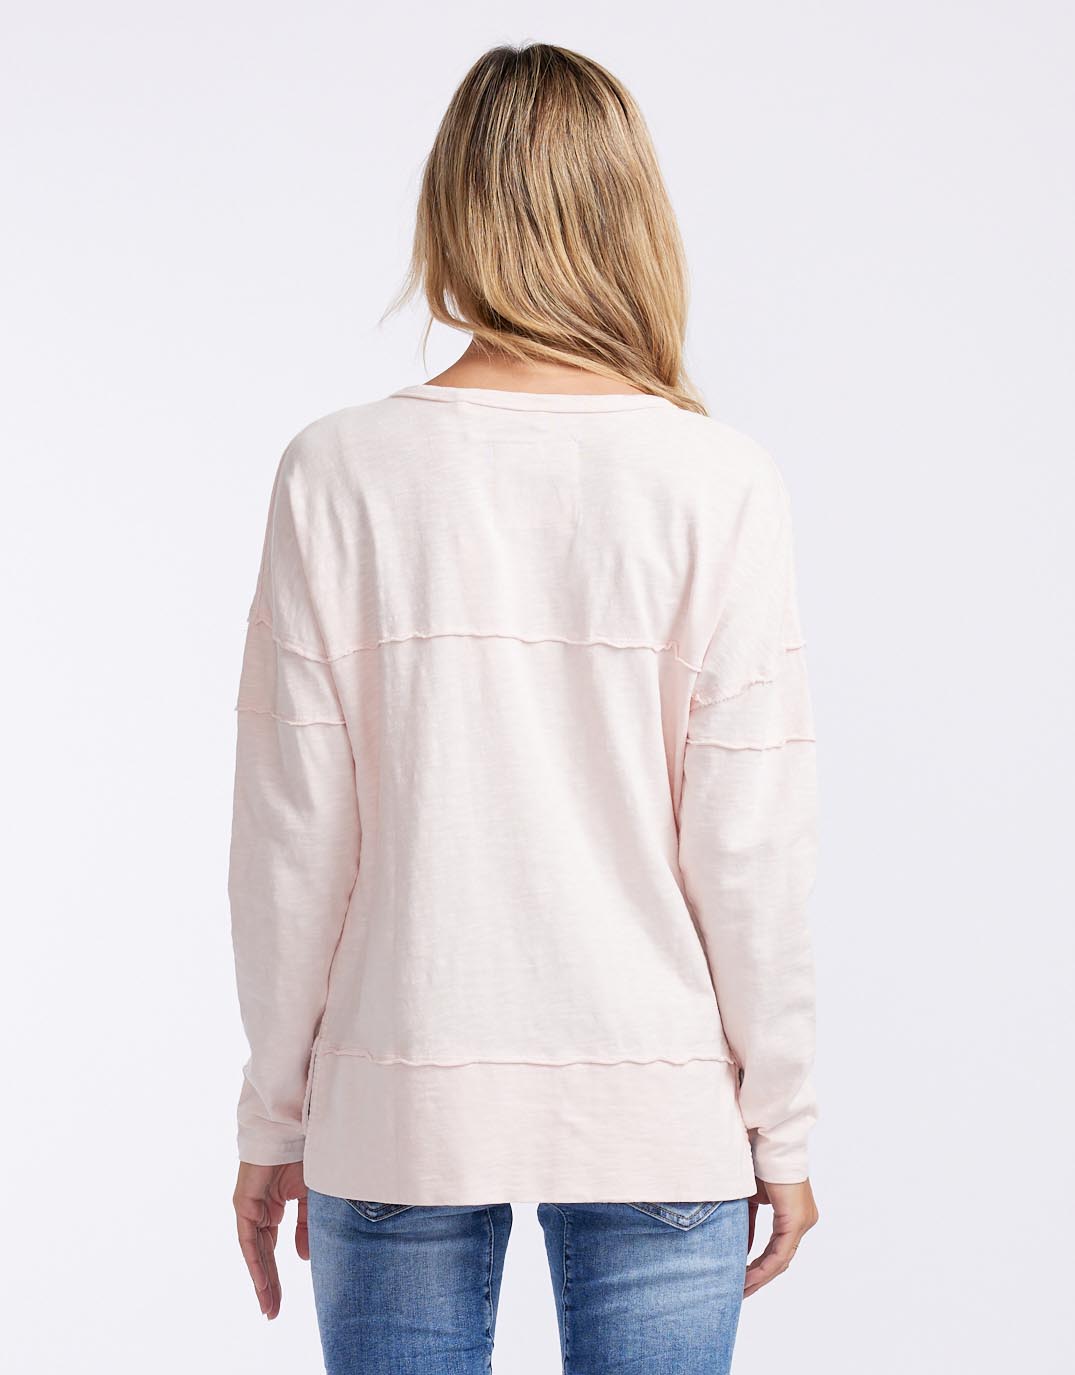 foxwood-jayne-throw-on-top-pale-pink-womens-clothing